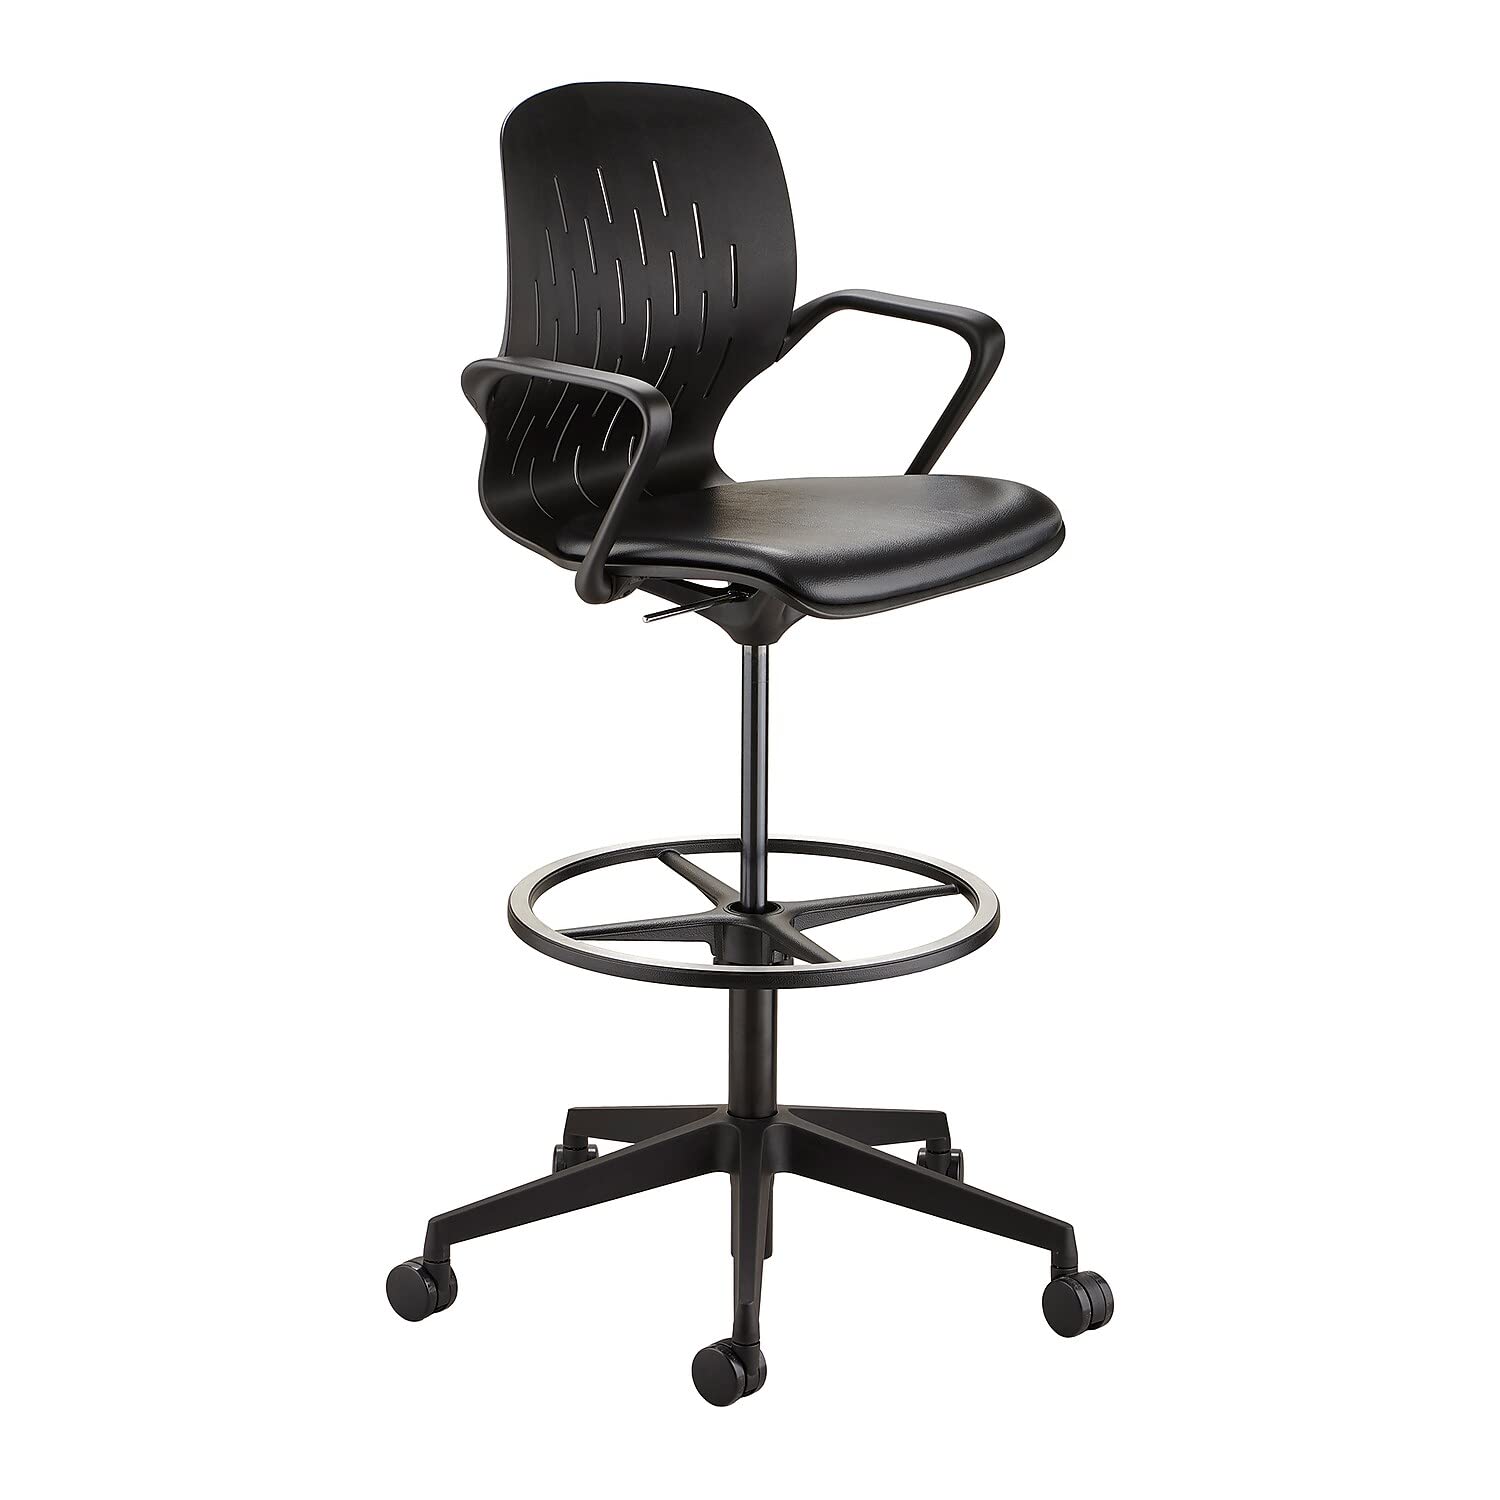 Safco Products Shell Extended Height Swivel Office Desk Computer Ergonomic Chair, Pneumatic Height Adjustable, Black (7014BL)